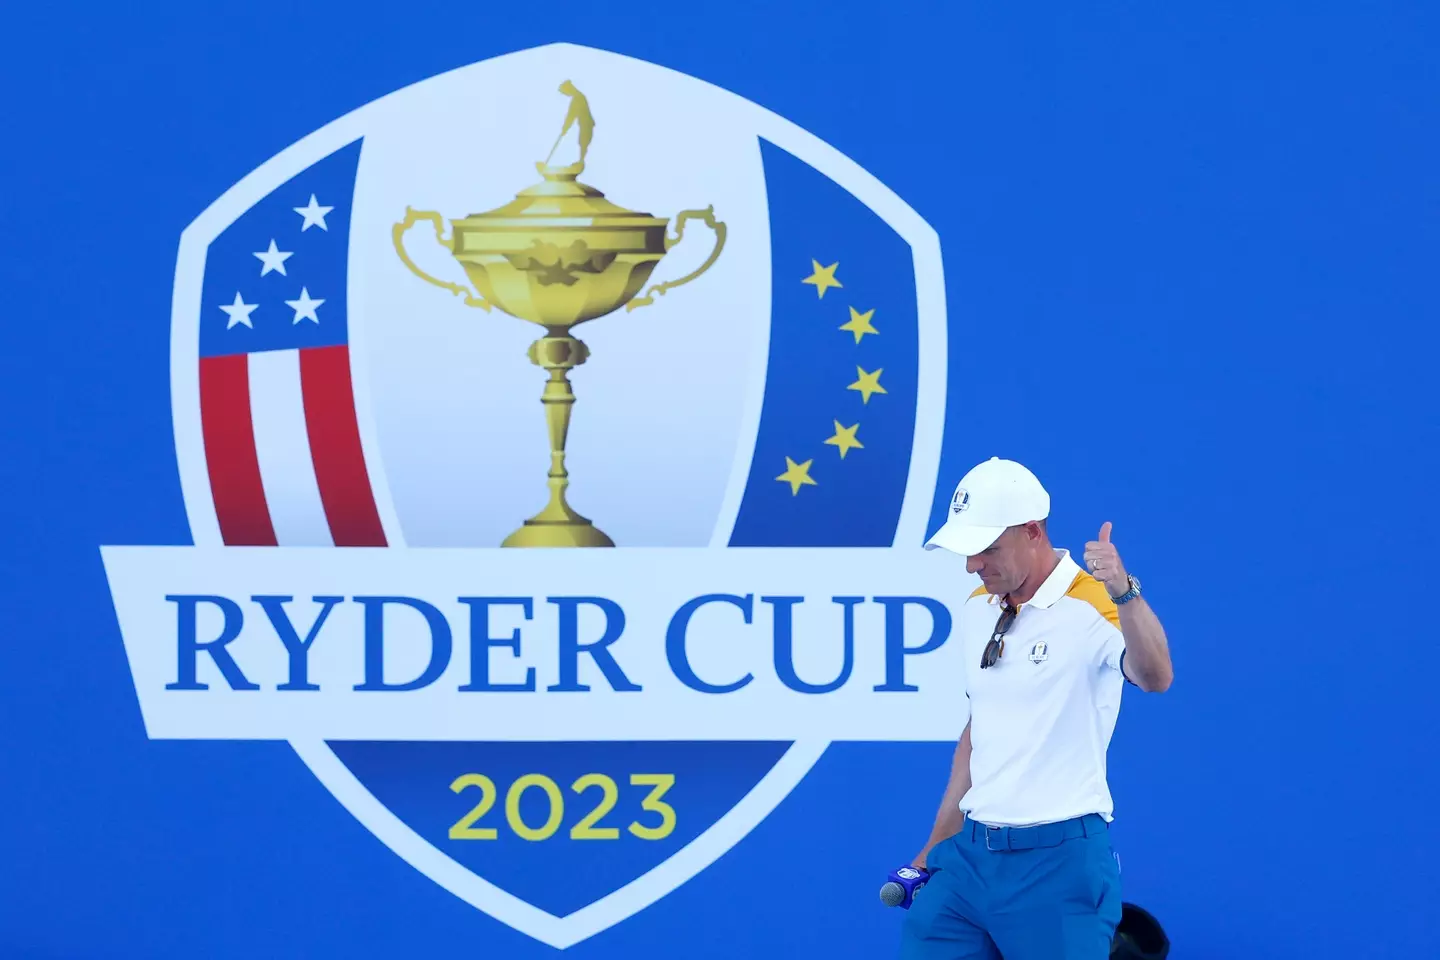 The Ryder Cup is taking place at Marco Simone Golf and Country Club near Rome this week.